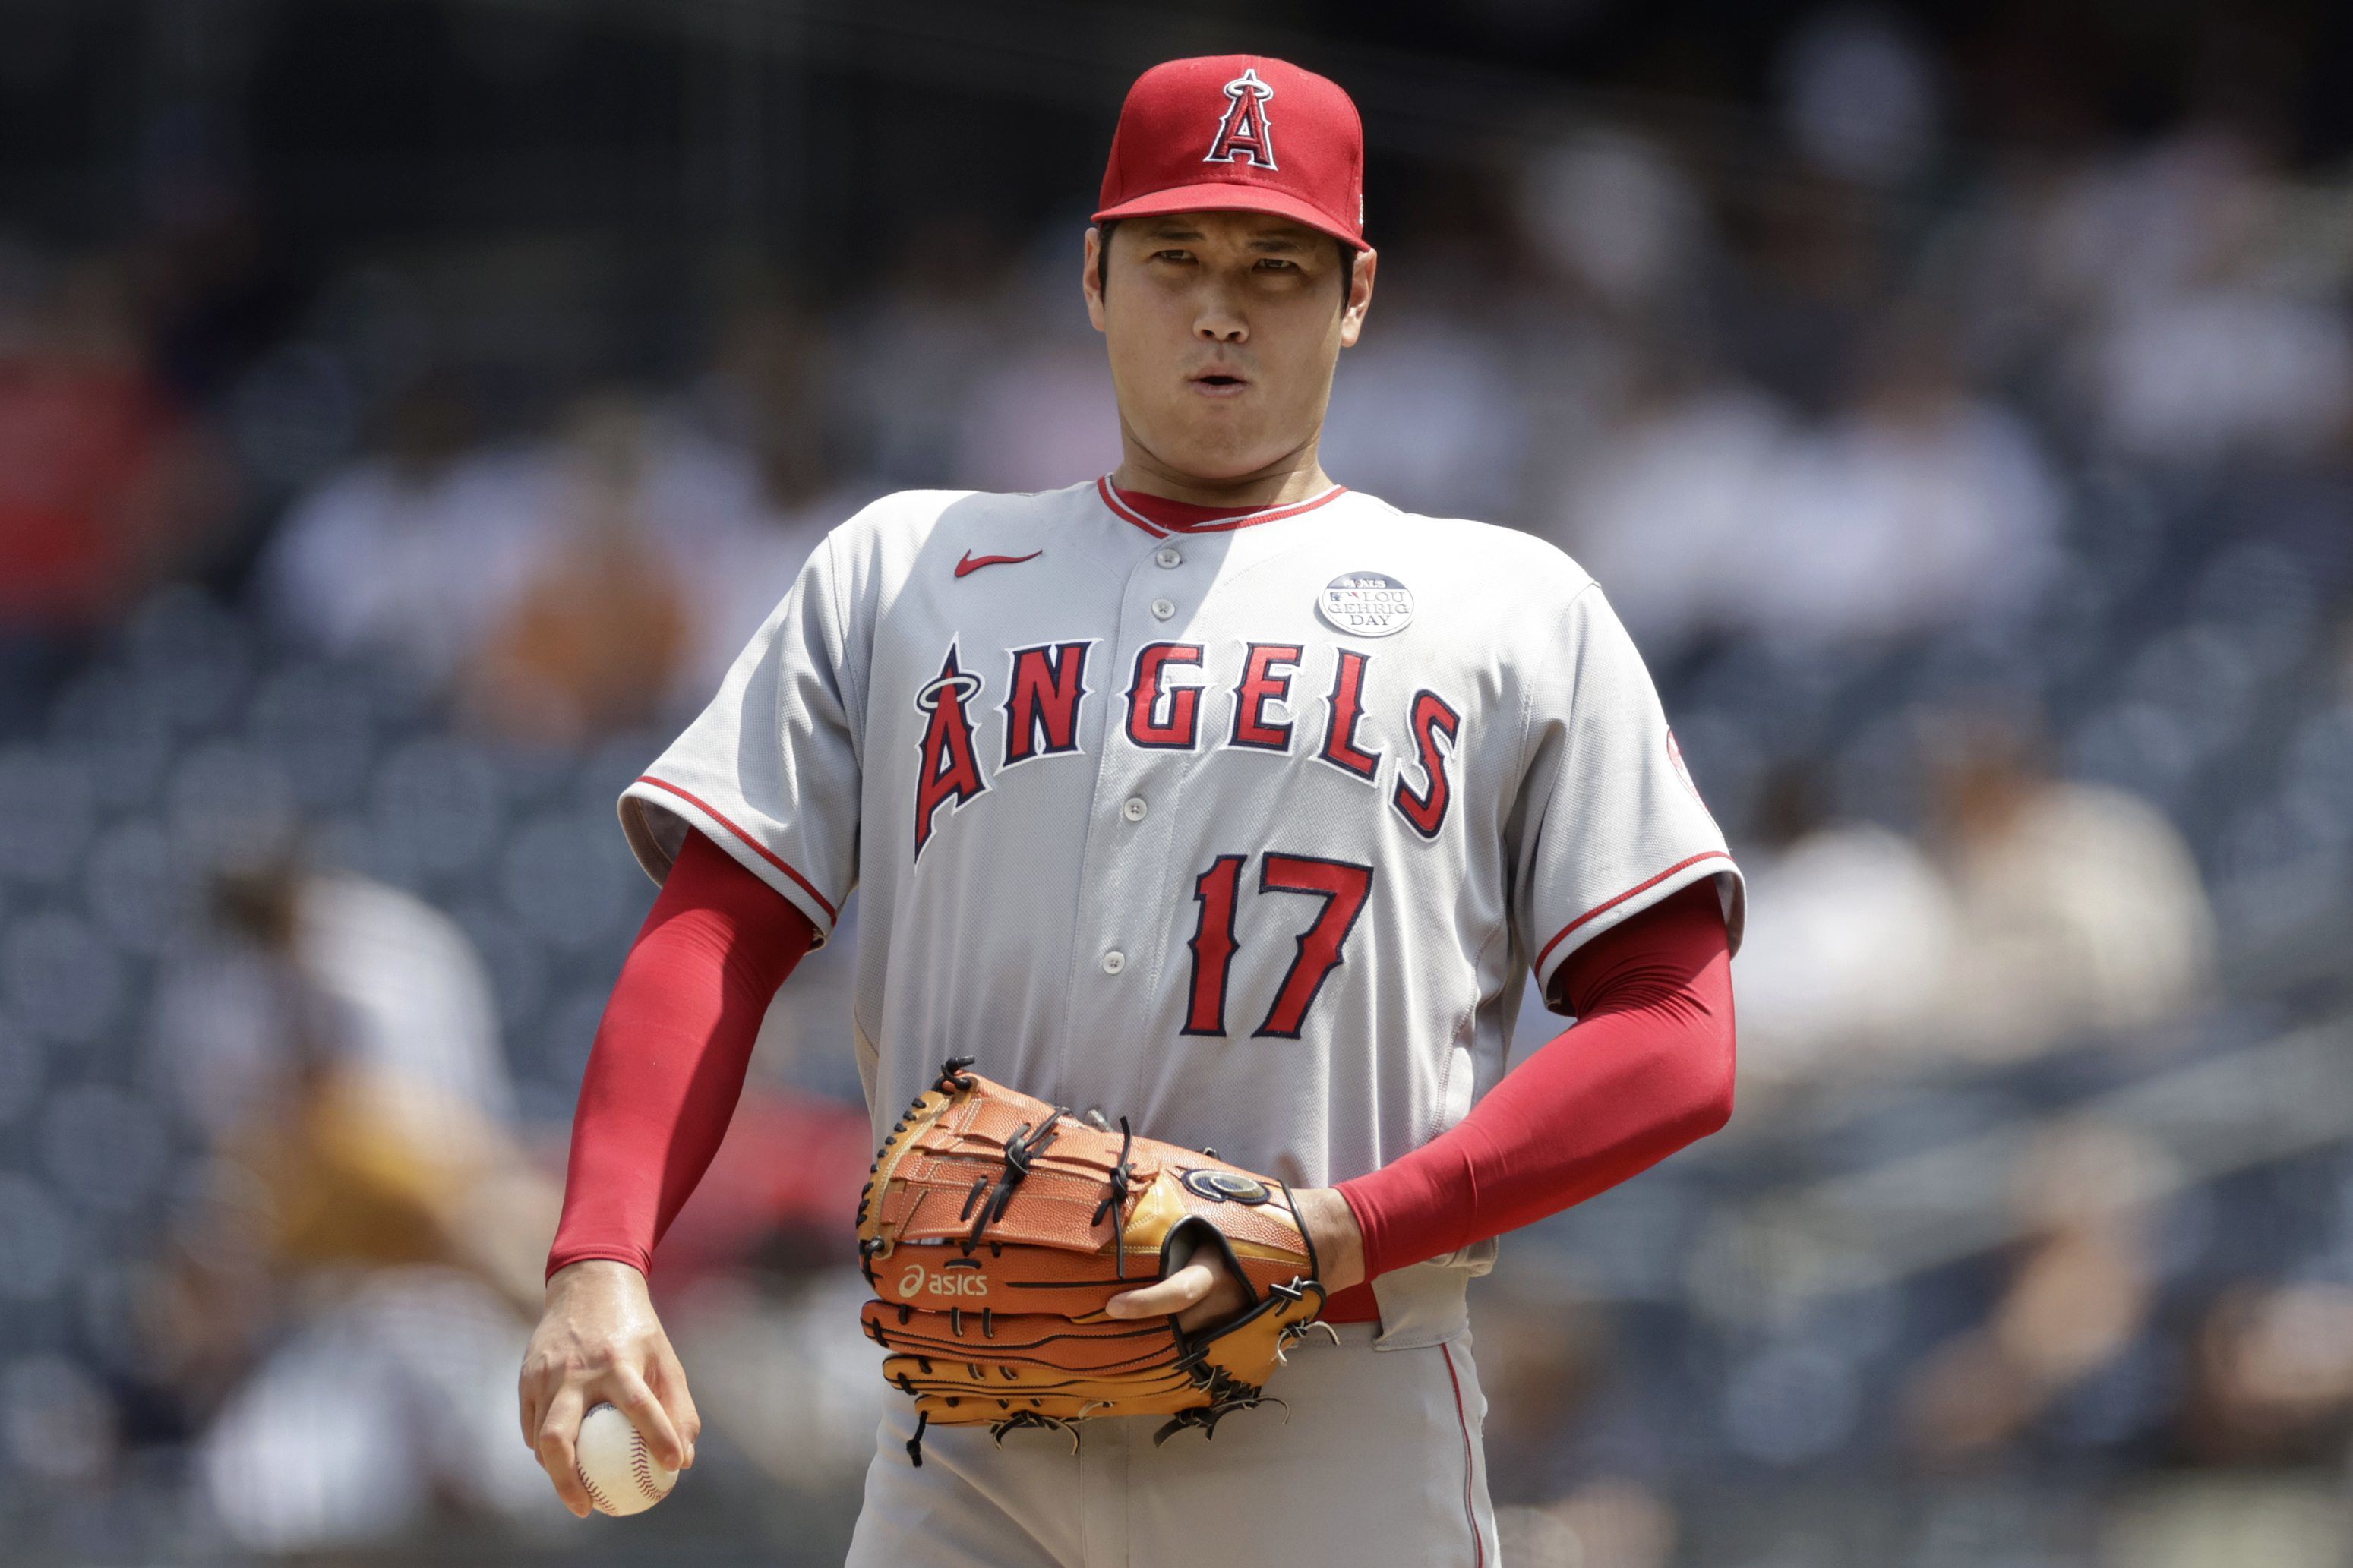 Get Real: The New York Yankees Will Not Land Mike Trout